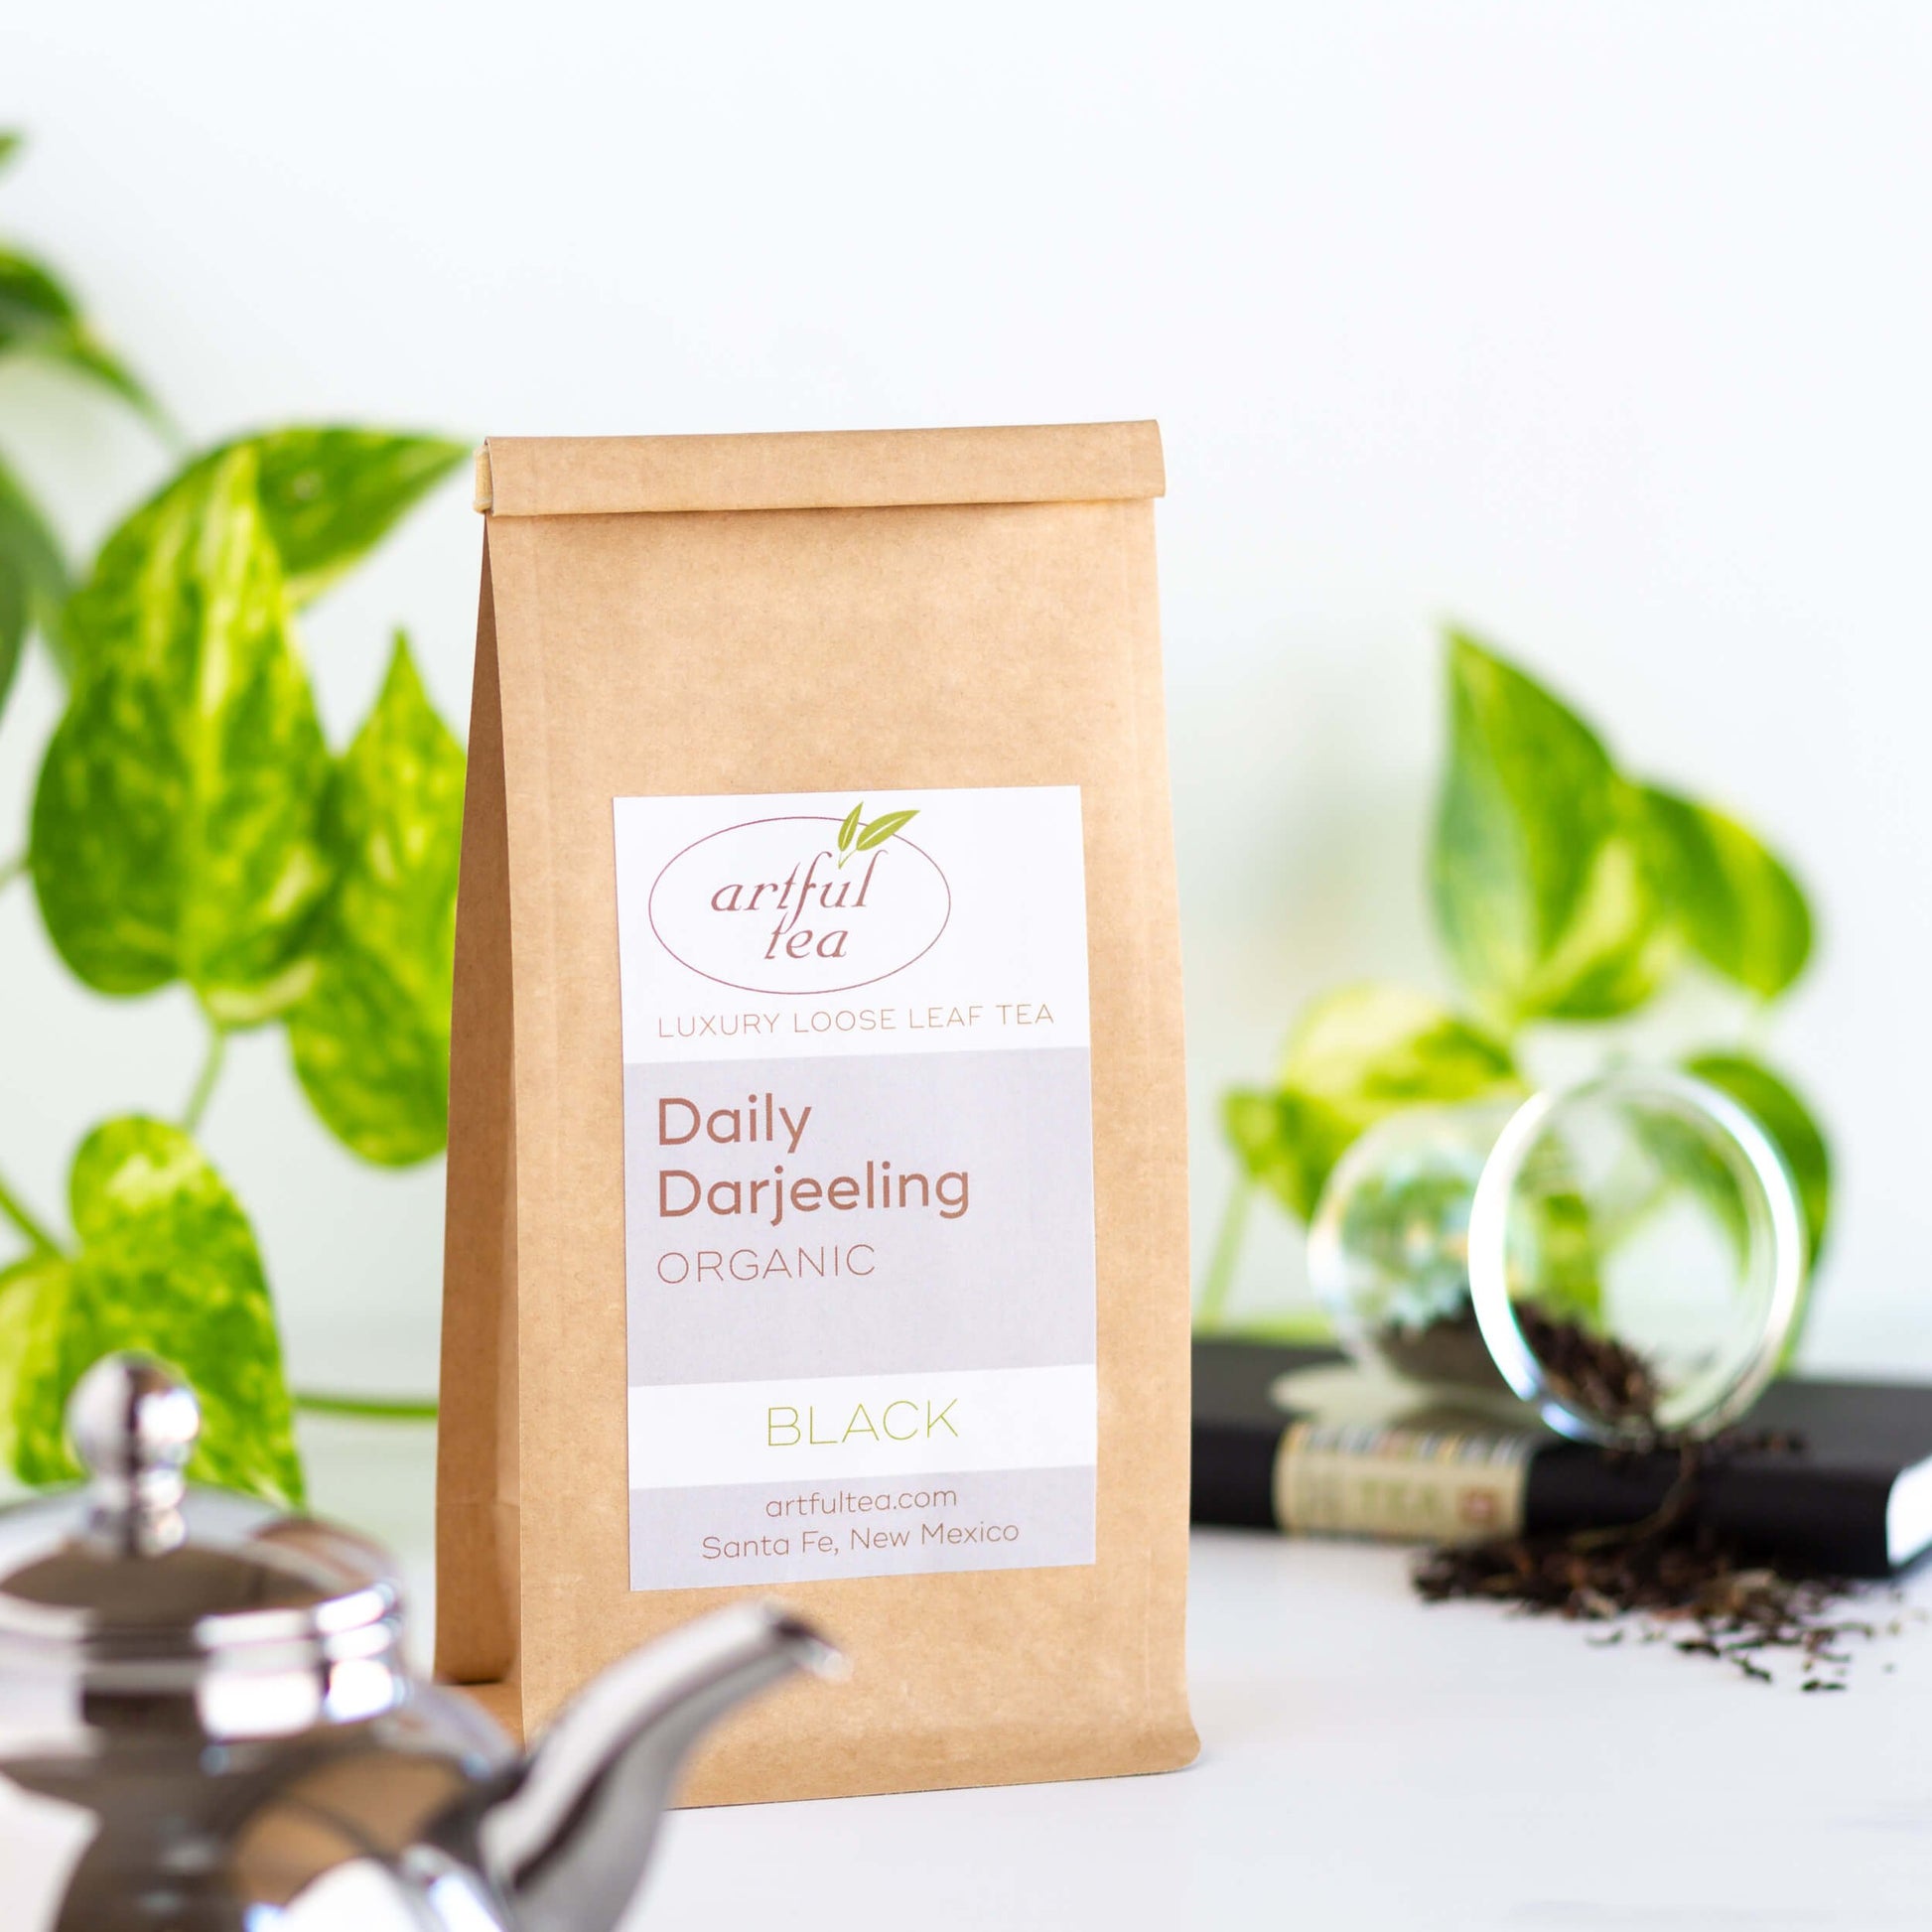 Organic Darjeeling Black Tea shown packaged in a kraft bag, with a silver teapot in the foreground, a black book and green plant in the background